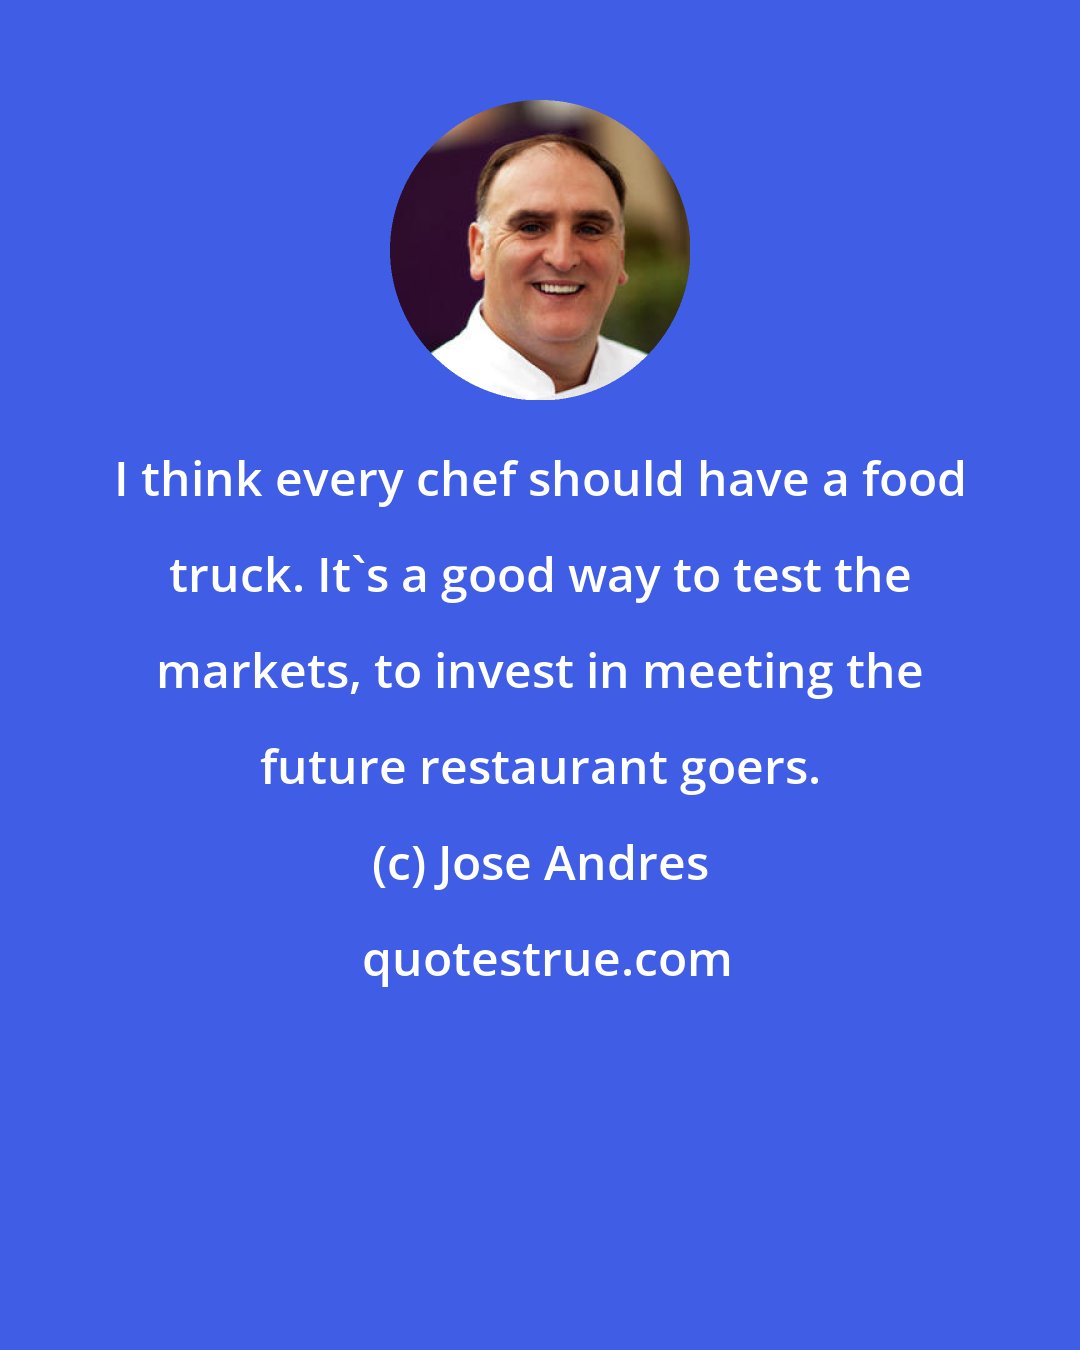 Jose Andres: I think every chef should have a food truck. It's a good way to test the markets, to invest in meeting the future restaurant goers.